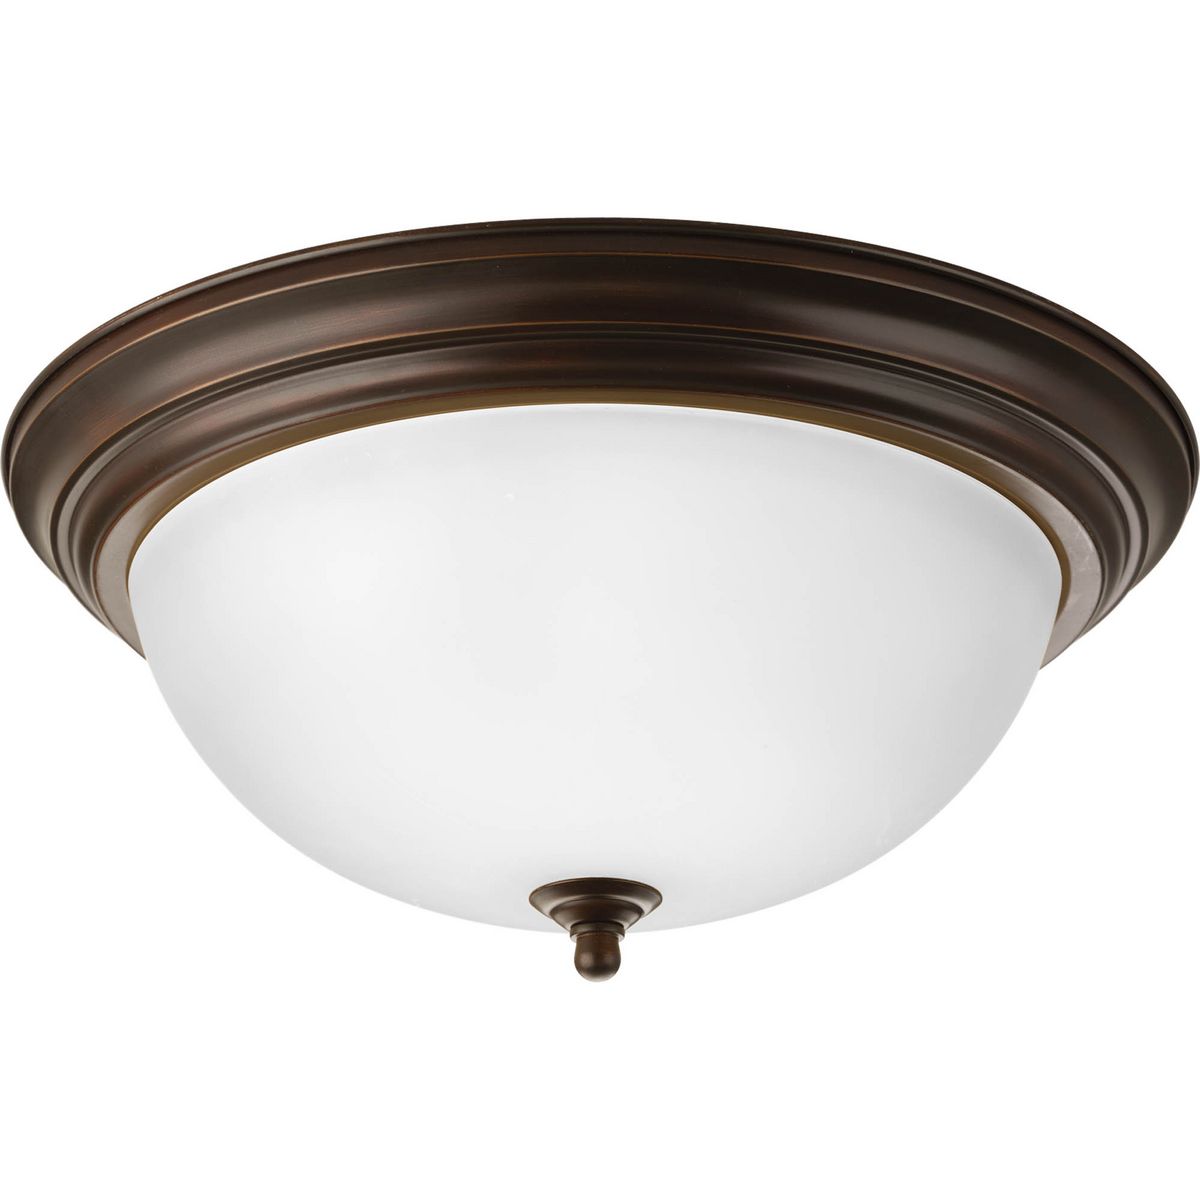 Three-Light Dome Glass 15-1/4" Close-to-Ceiling - Damp Location Listed - P3926-20ET